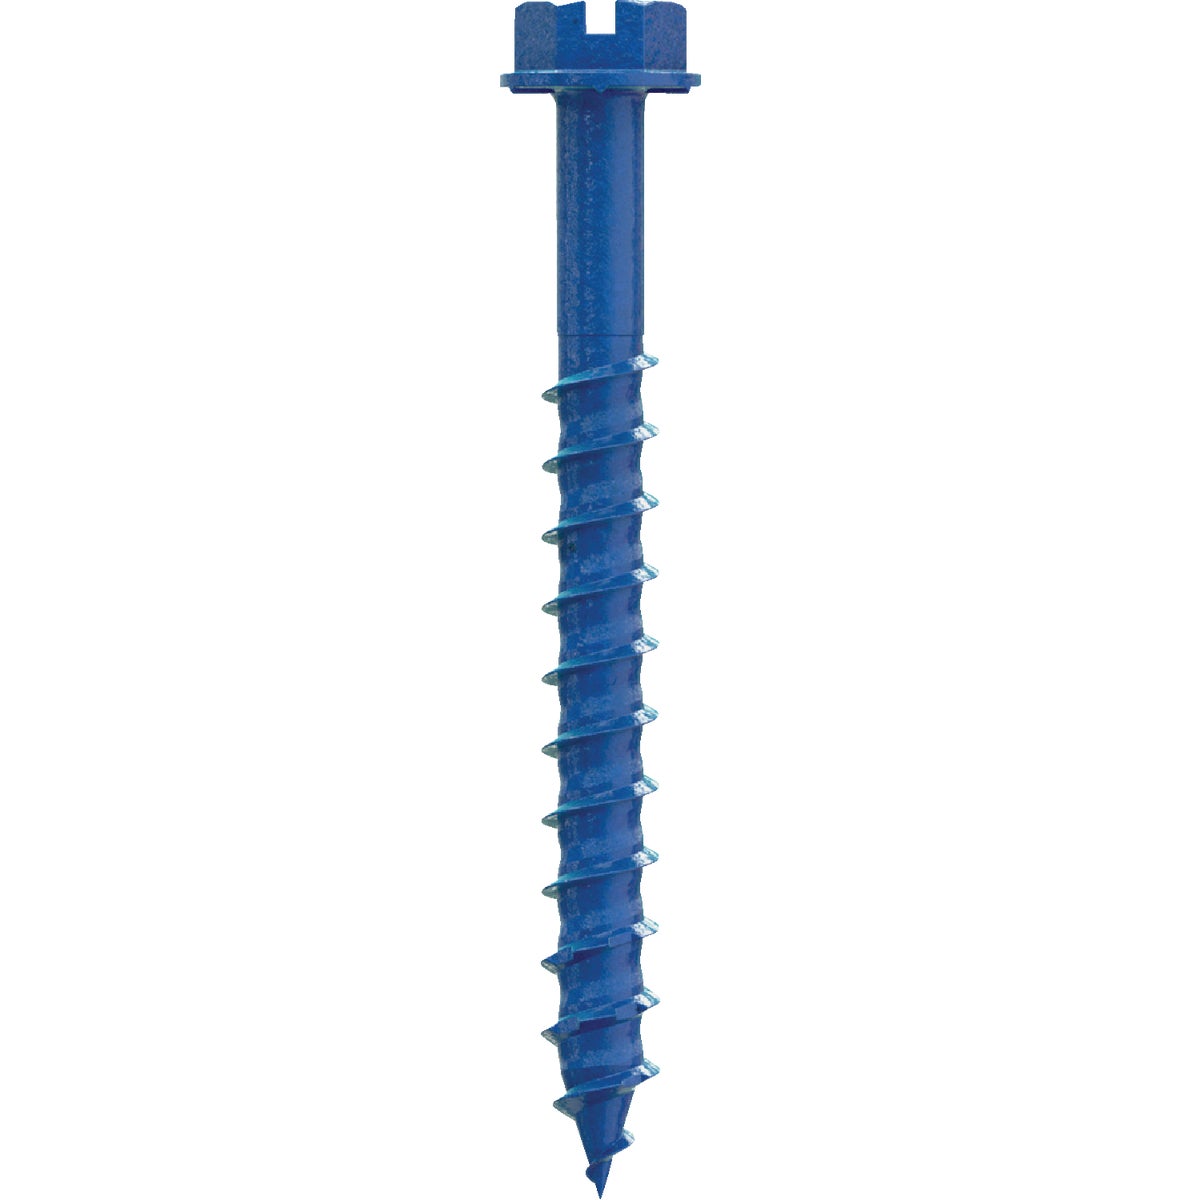 Simpson Strong-Tie Titen Turbo  1/4 in. x 2-1/4 in. Hex-Head Concrete and Masonry Screw, Blue (100-Qty)